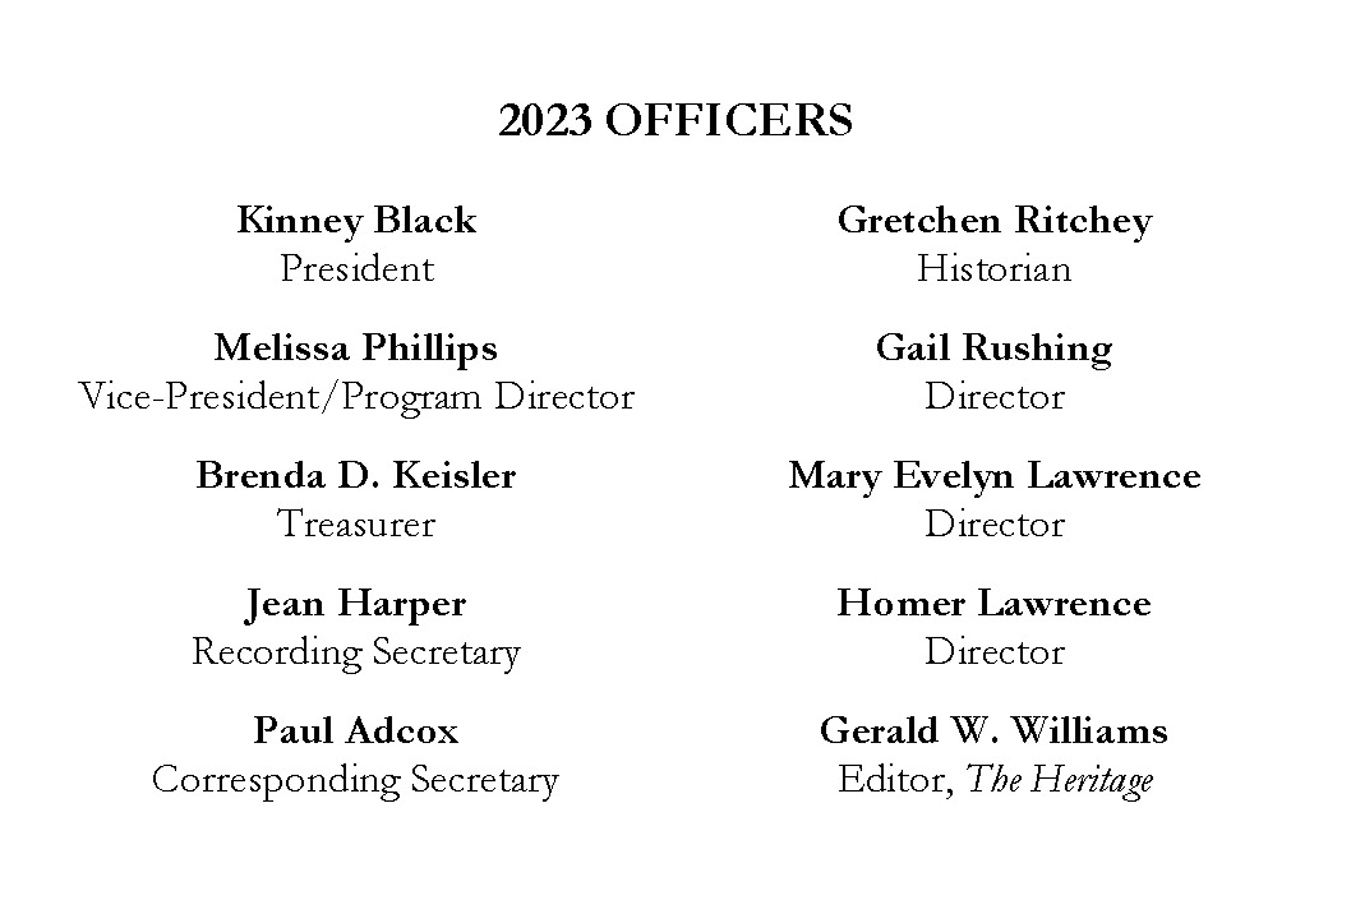 2023 OFFICERS 2